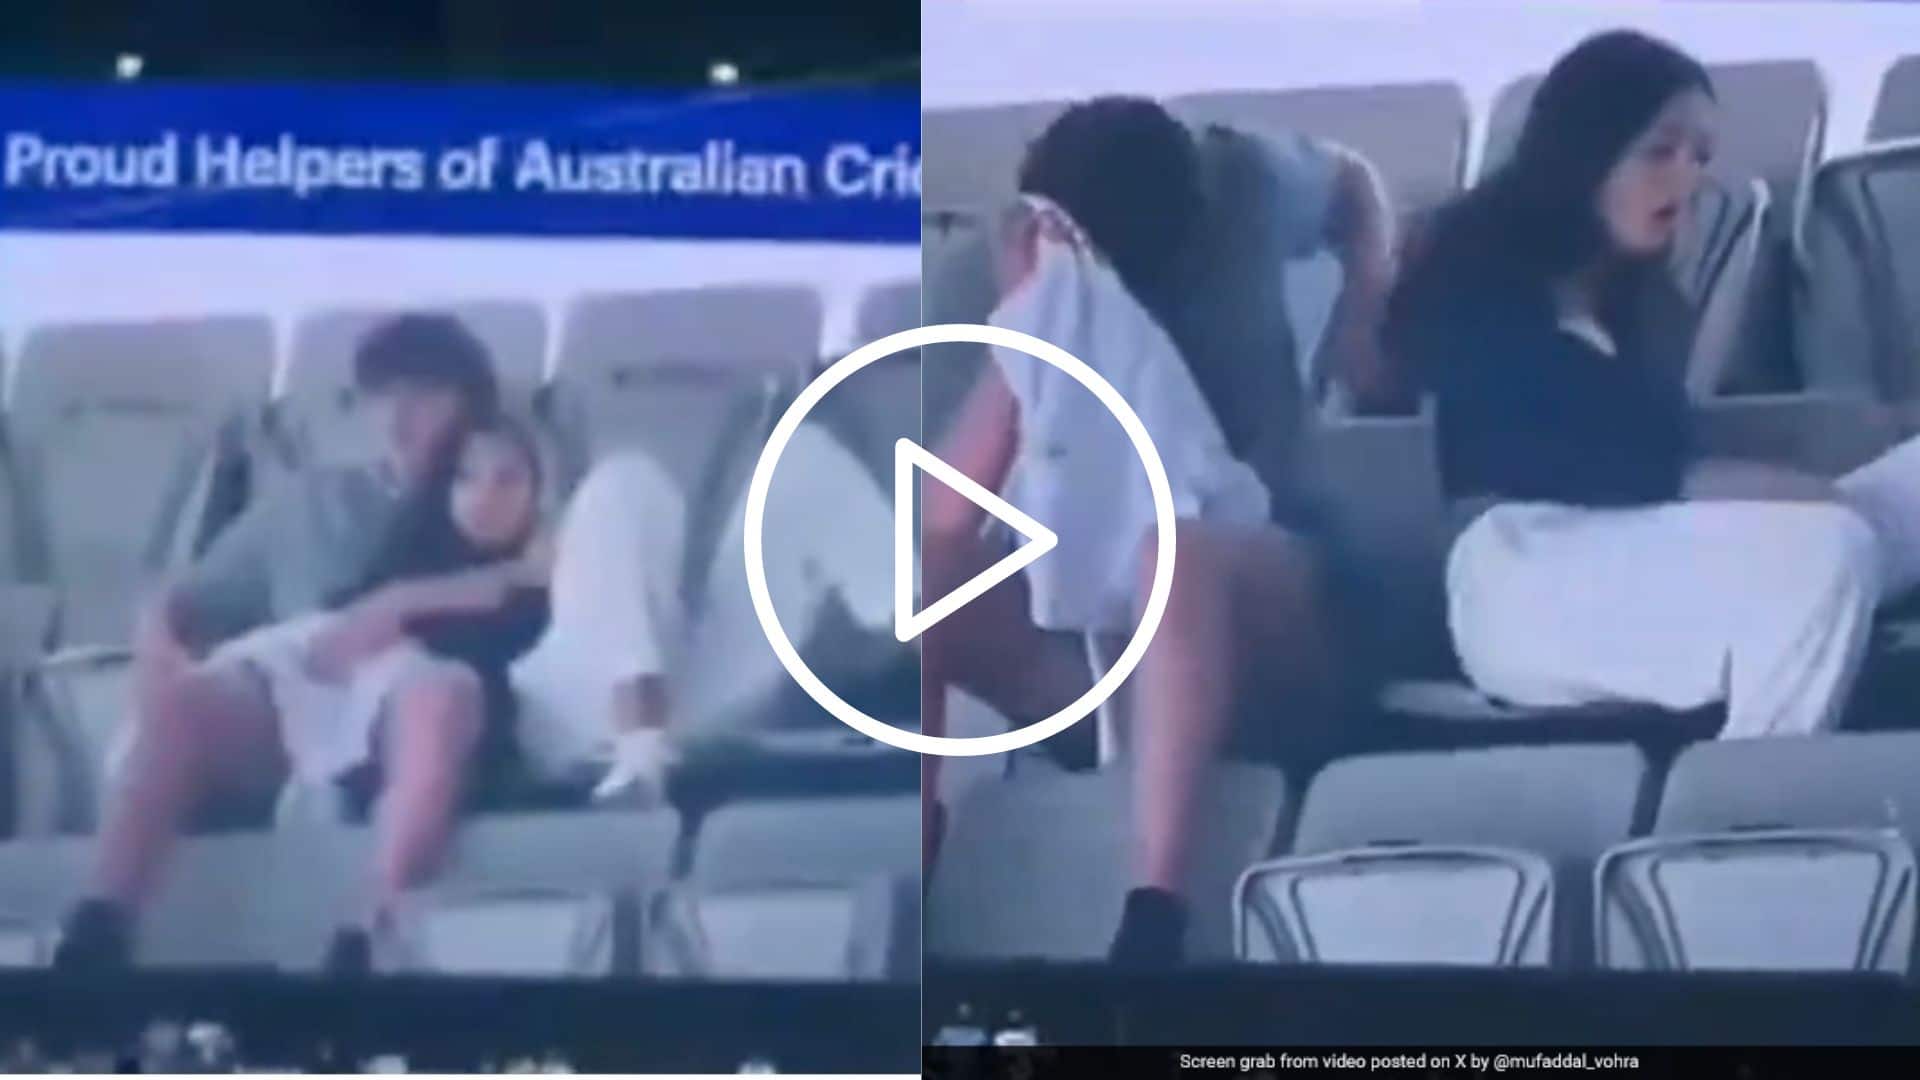 [Watch] Young Couple's Oops Moment Caught On Camera At MCG During AUS Vs PAK Test